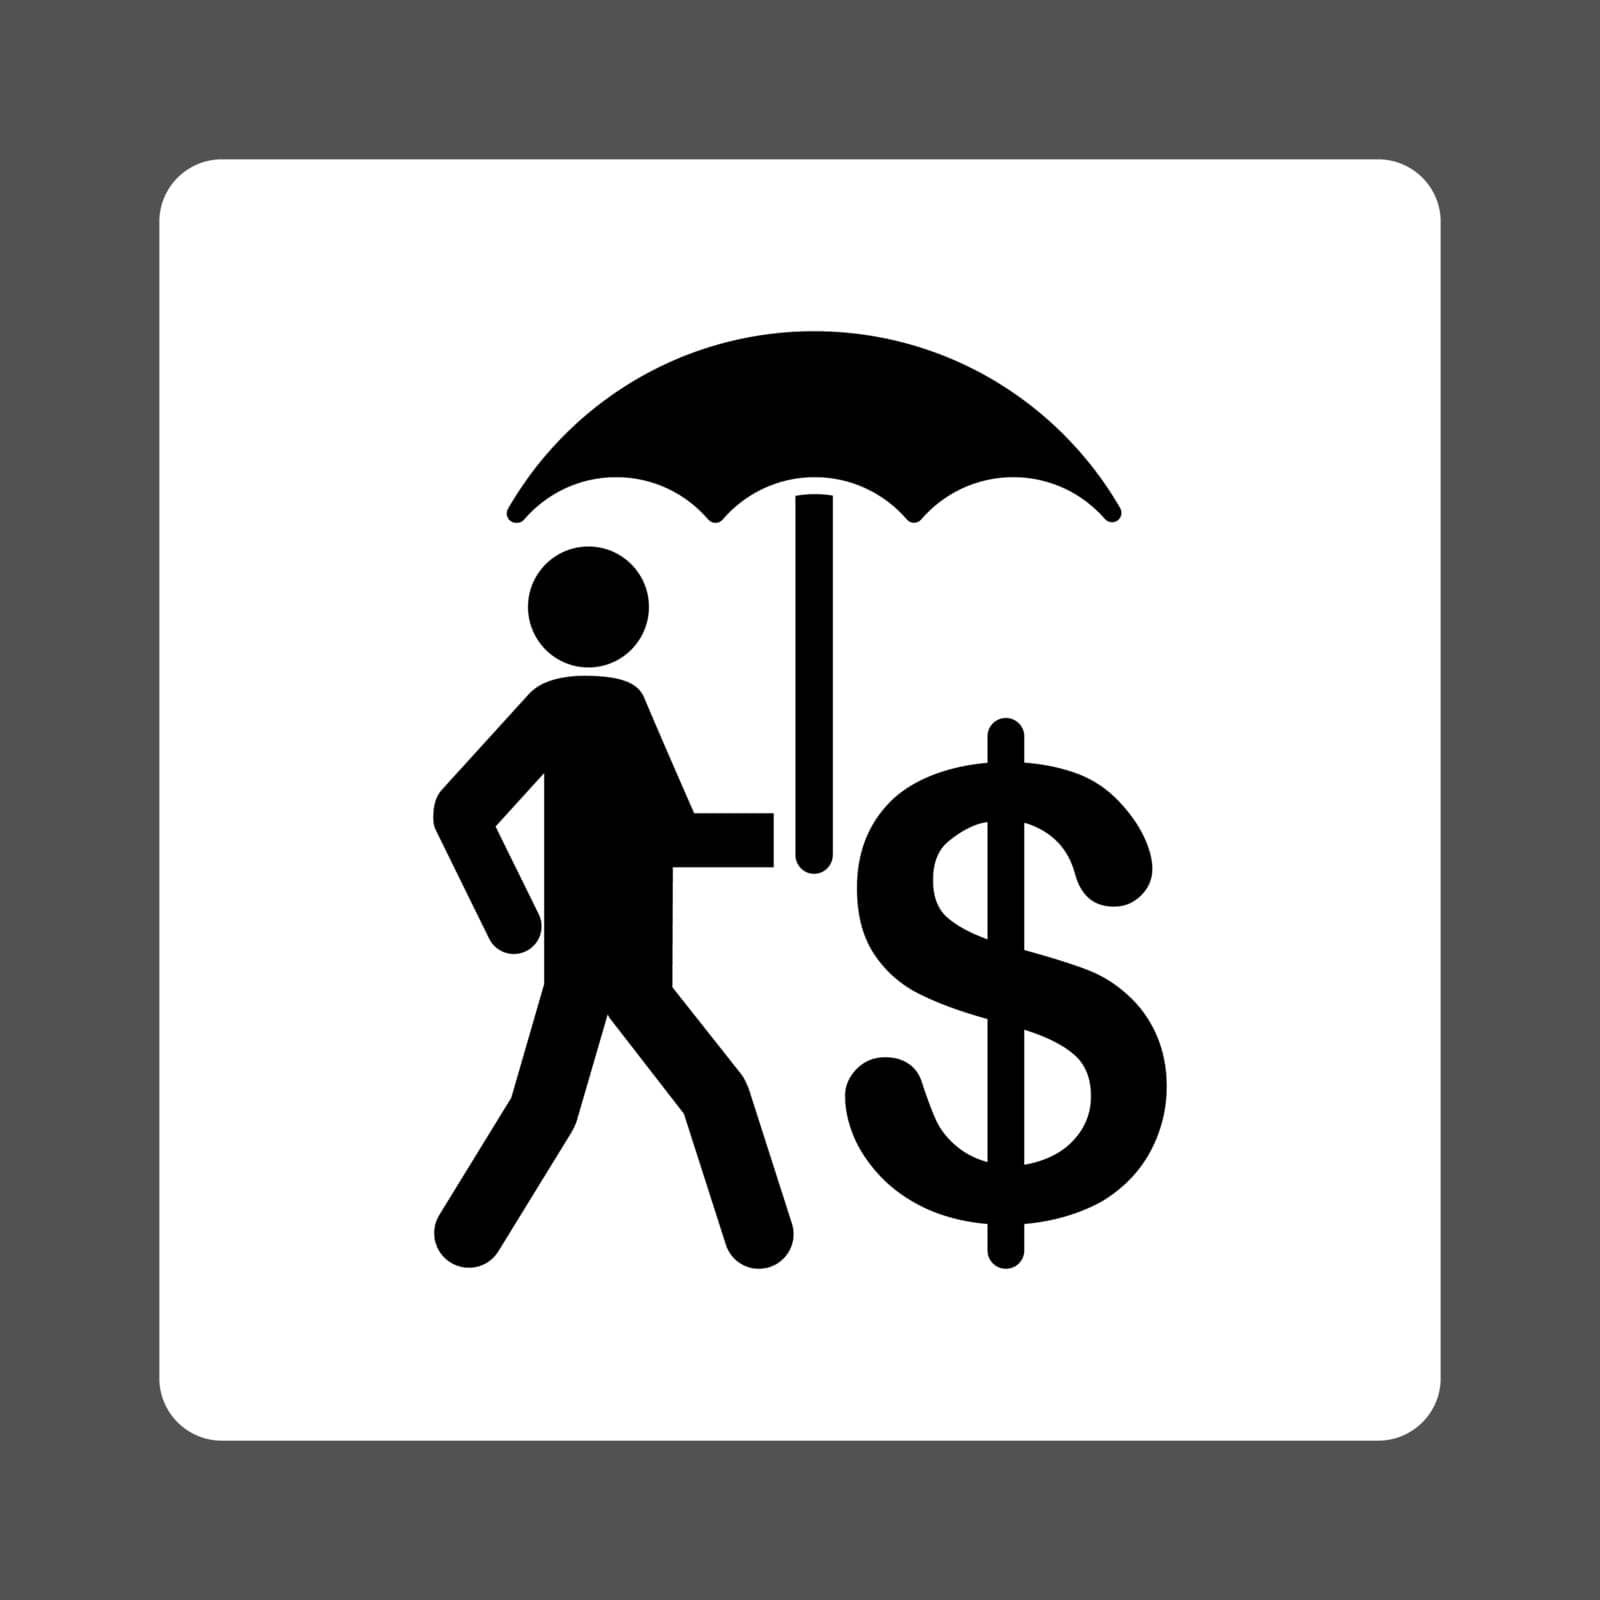 Umbrella icon. This flat vector symbol uses black and white colors, rounded angles, and gray background on a gray background.